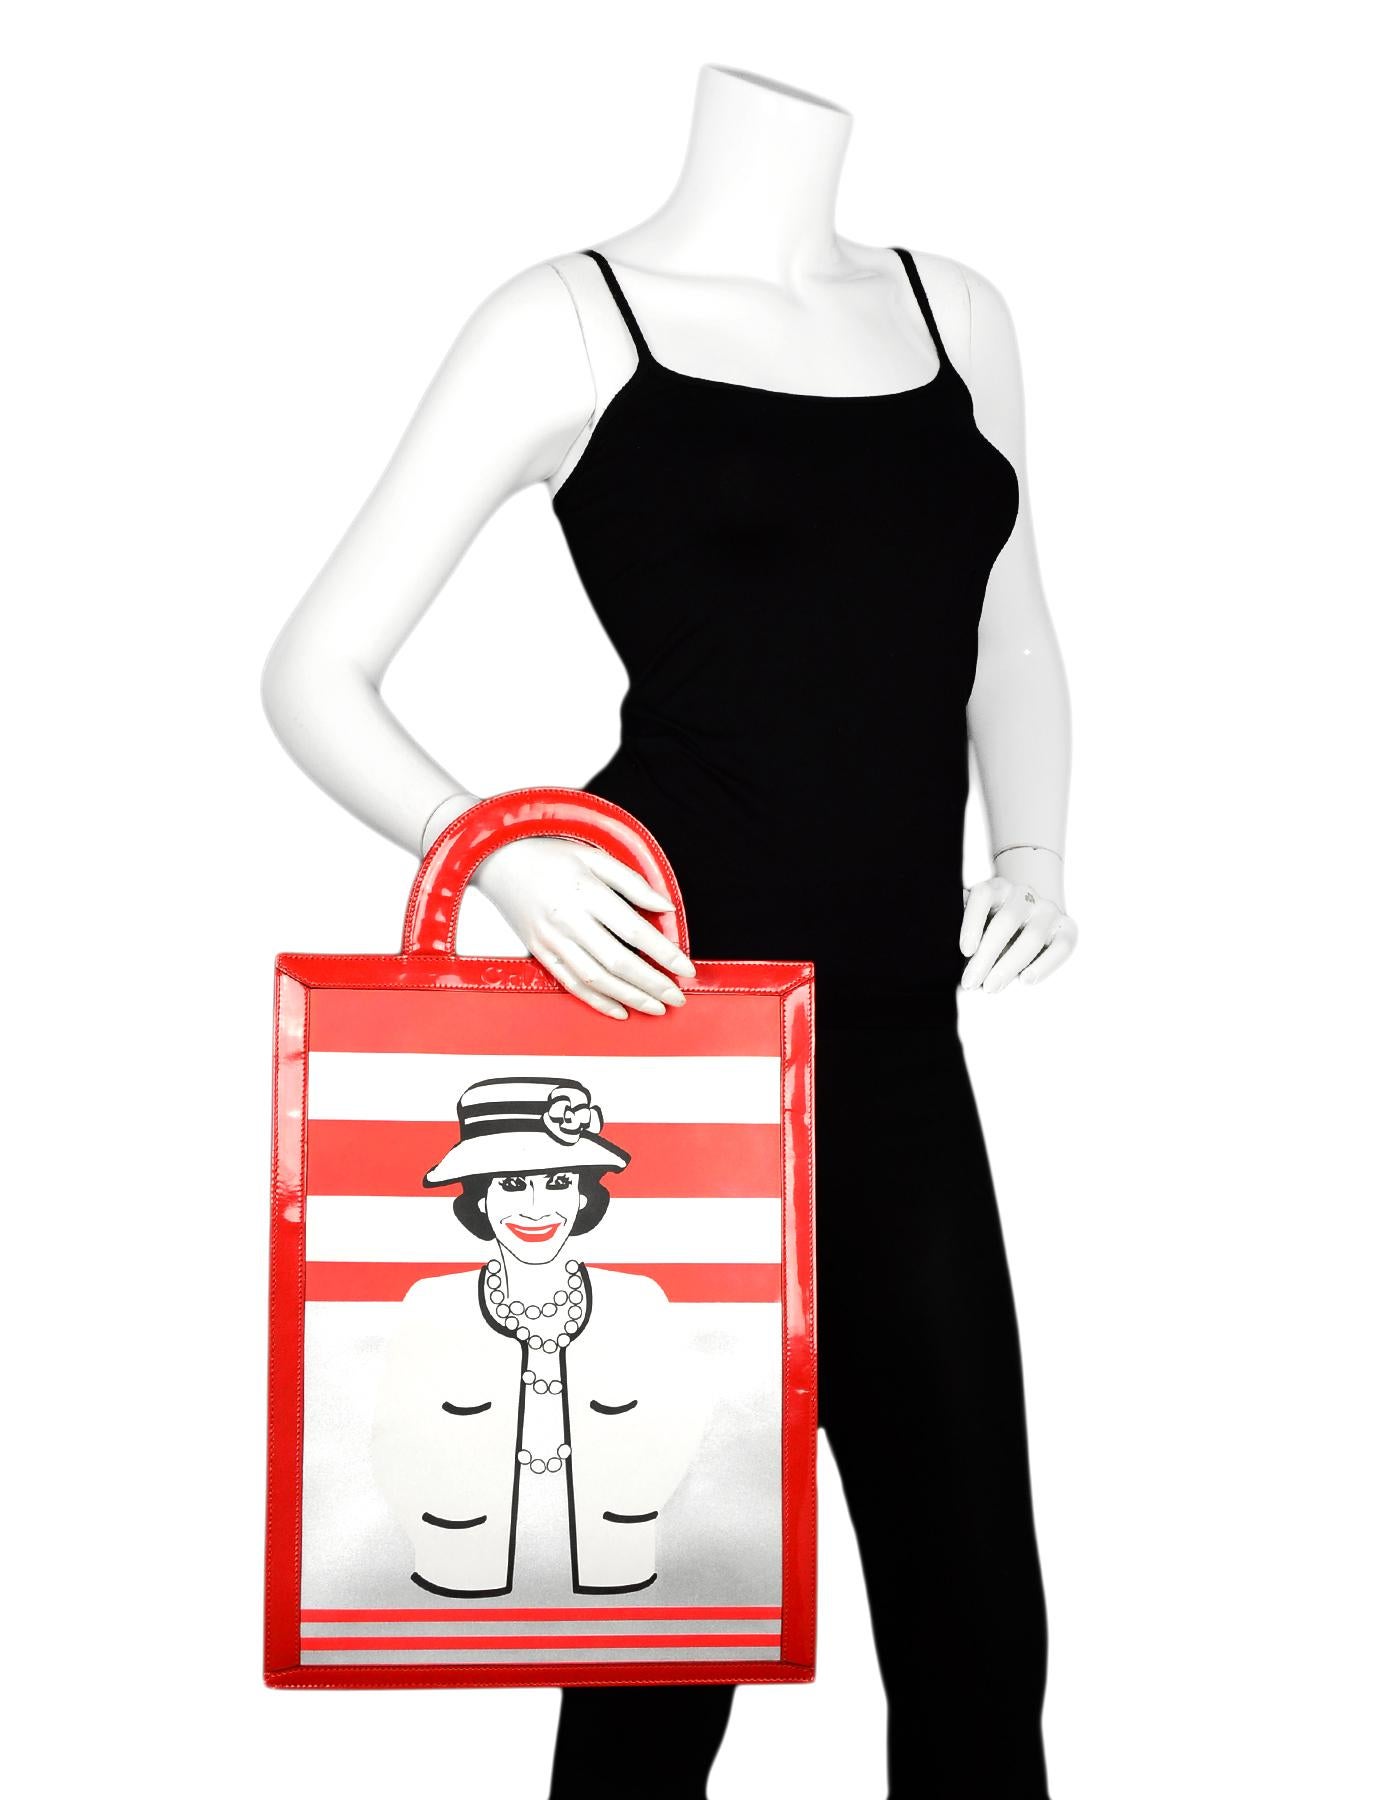 Chanel Red/Black Patent Leather Coco Mademoiselle Portrait Large Tote Bag

Made In: France
Year of Production: 2001
Color: Red, black, white
Hardware: Black
Materials: Patent leather, leather
Lining: Black textile 
Closure/Opening: Open top
Exterior